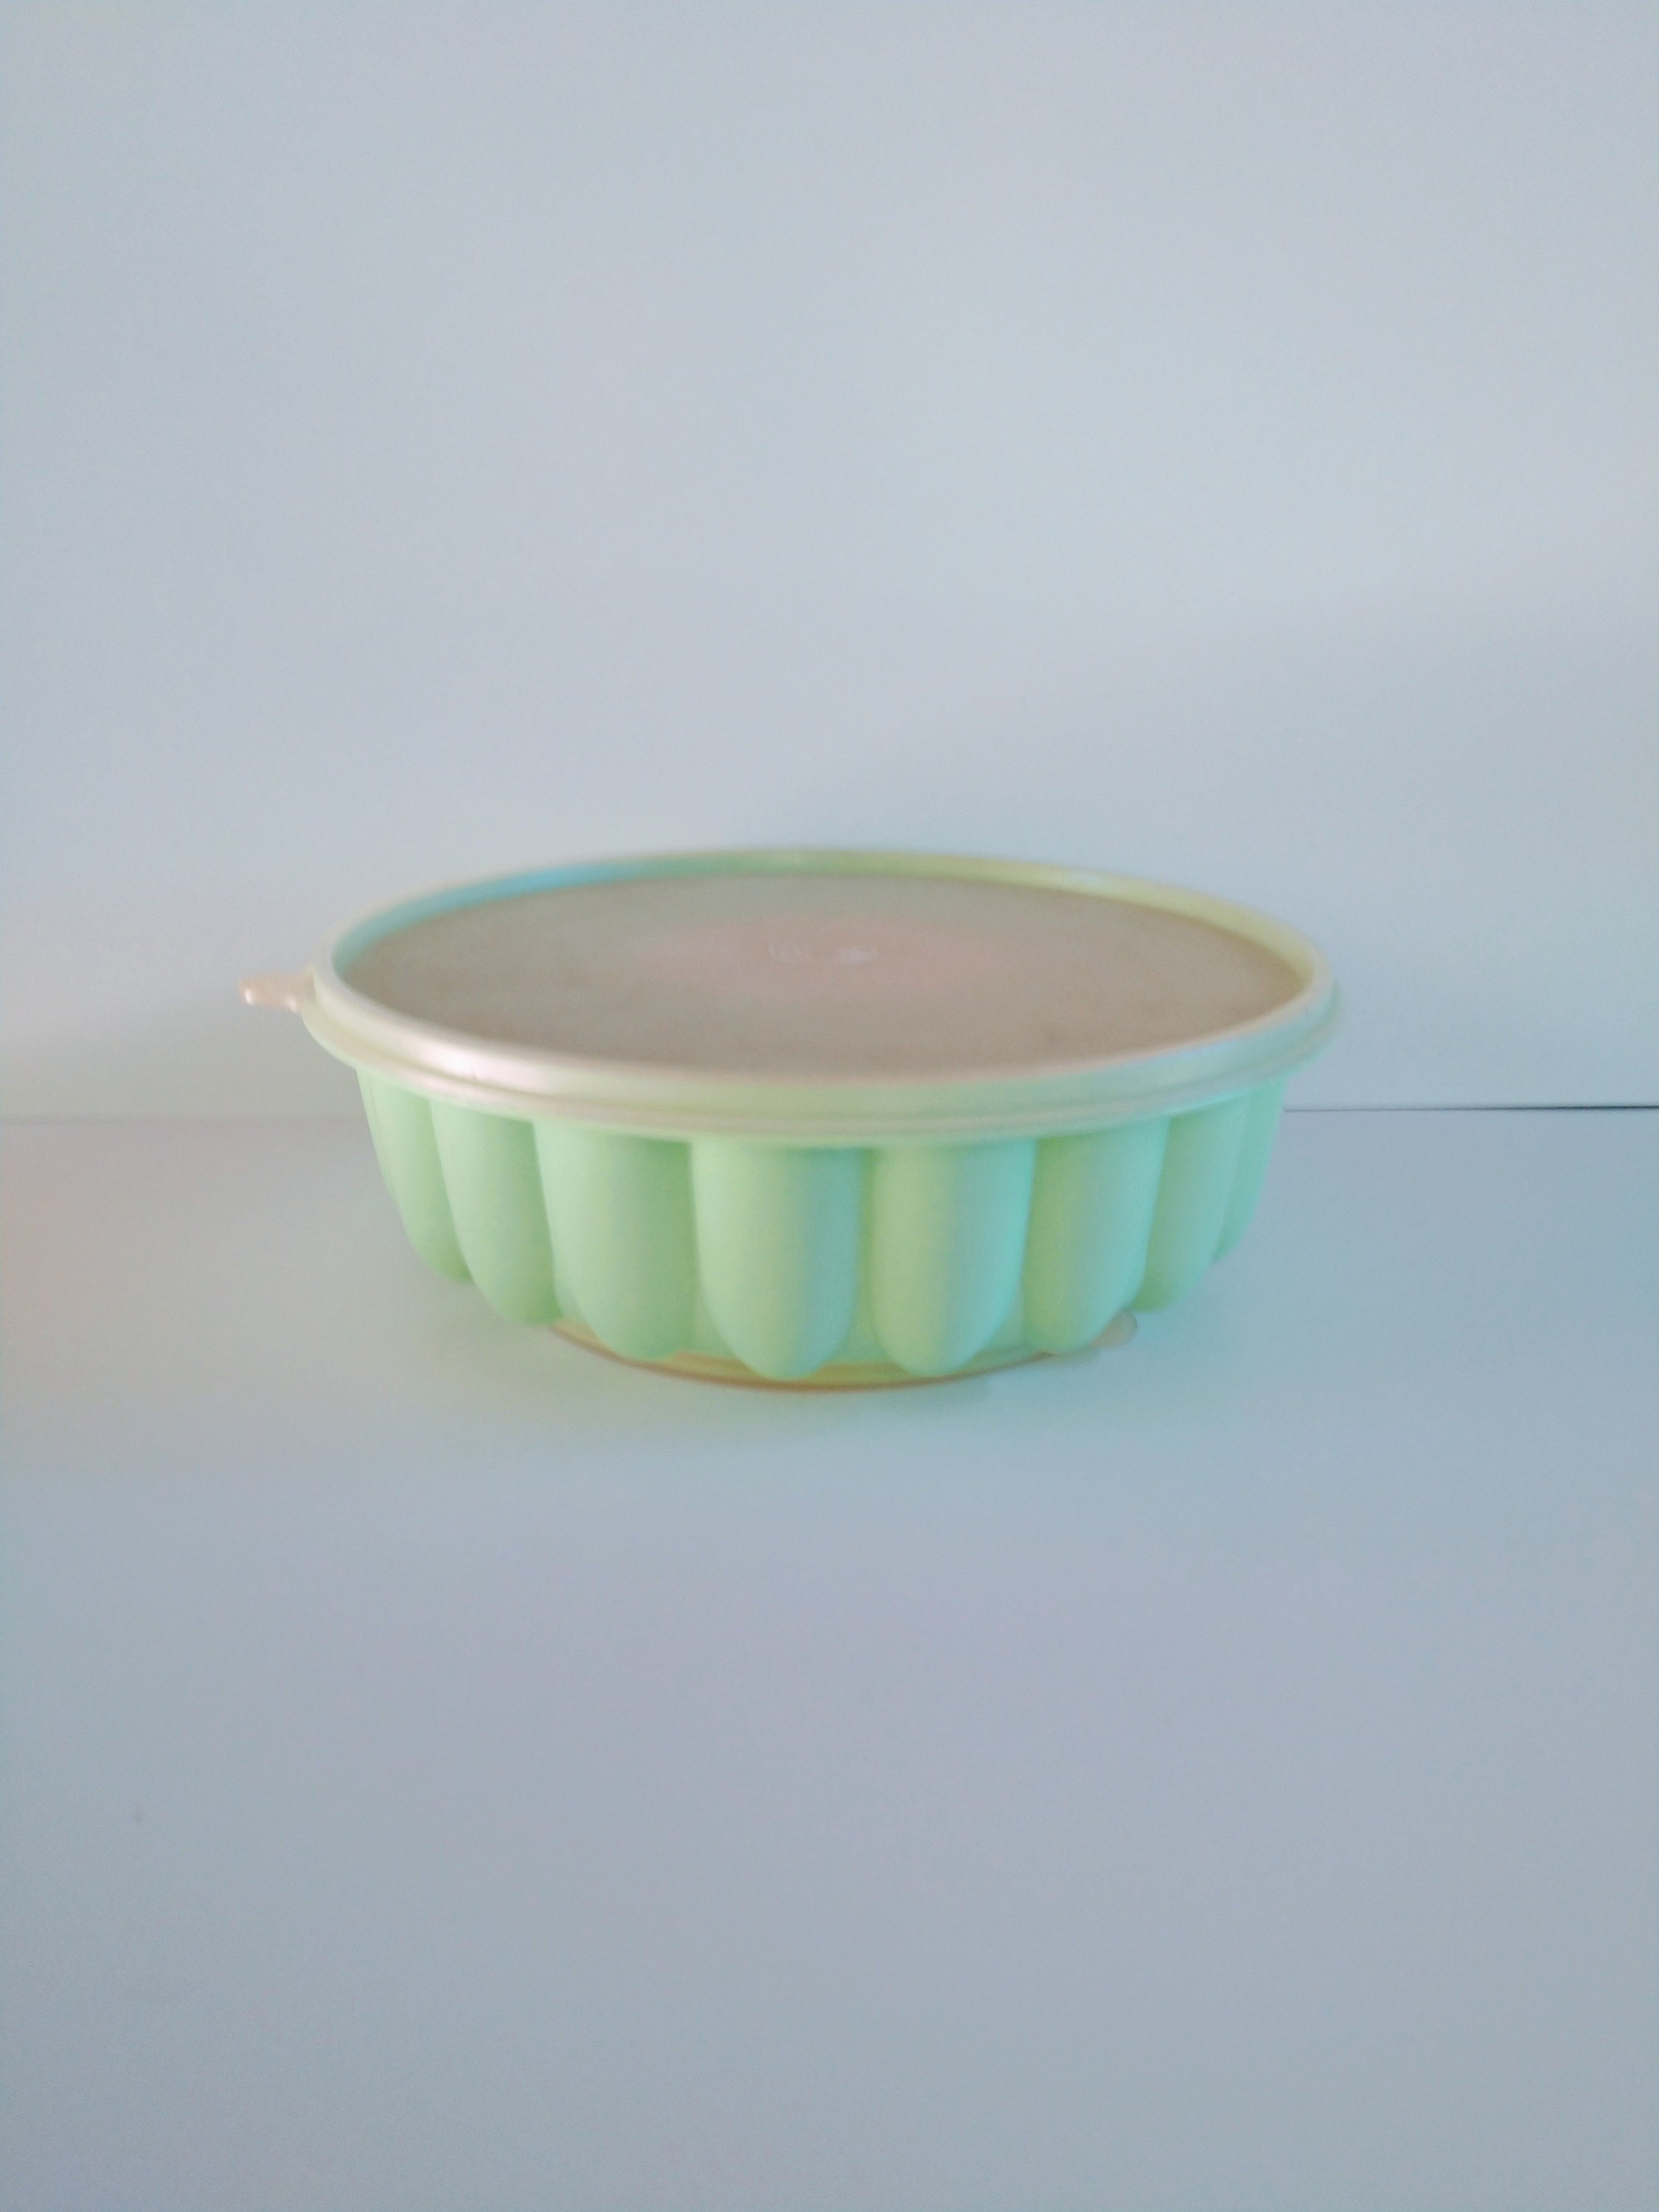 Jel Party Multilayer Dessert and Dip Mold – Tupperware US